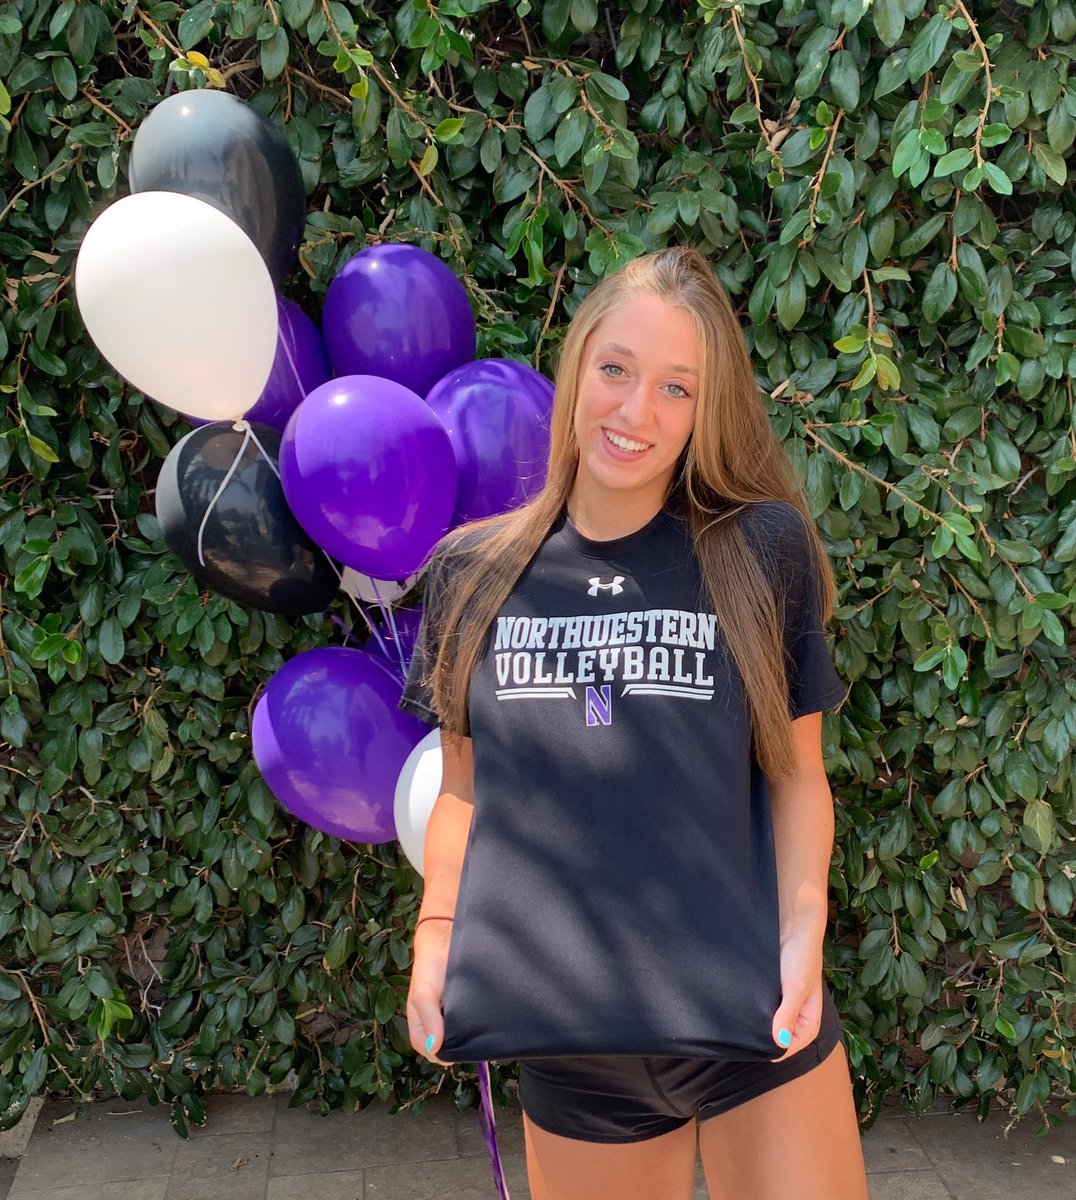 I’m incredible excited to announce my verbal commitment to play volleyball at Northwestern University! Thank you to everyone who encouraged me and helped me on this journey! Go cats💜💜#B1G #NU #d1volleyball